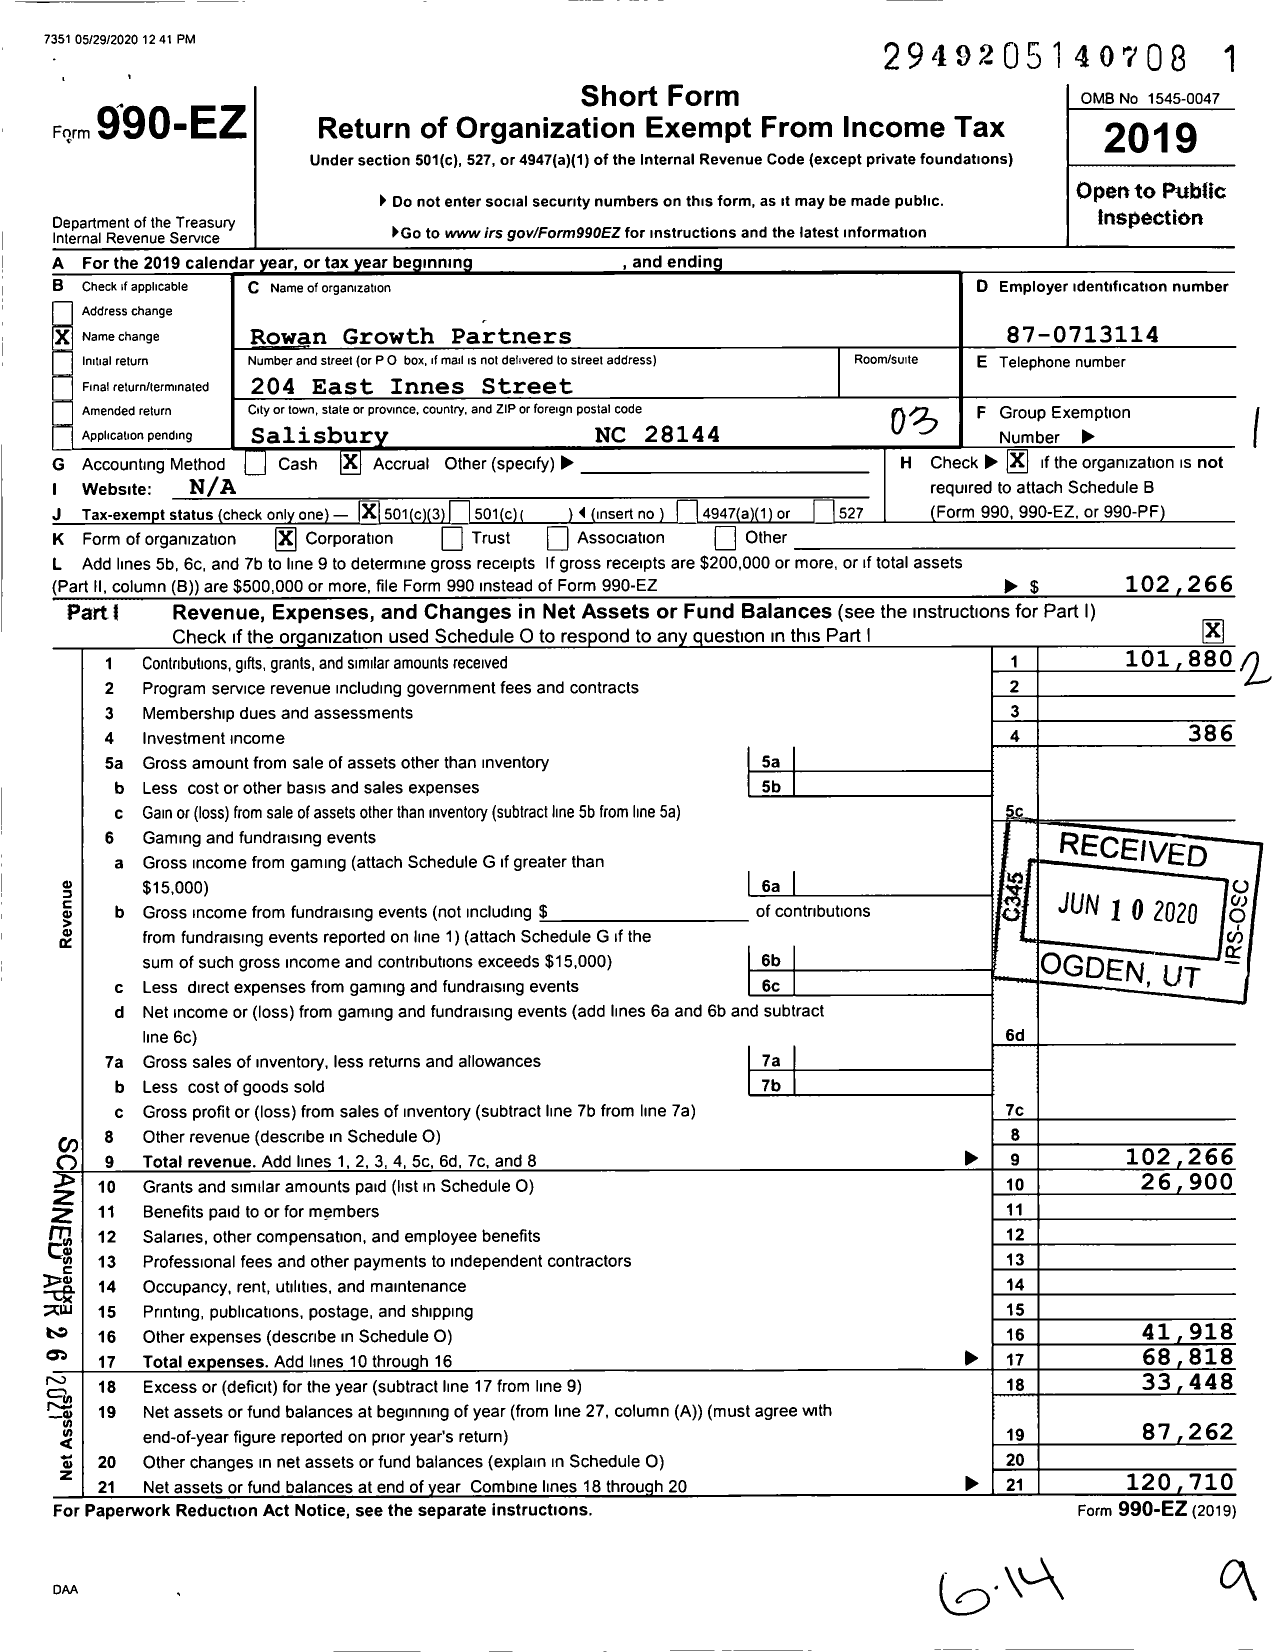 Image of first page of 2019 Form 990EZ for Rowan Growth Partners